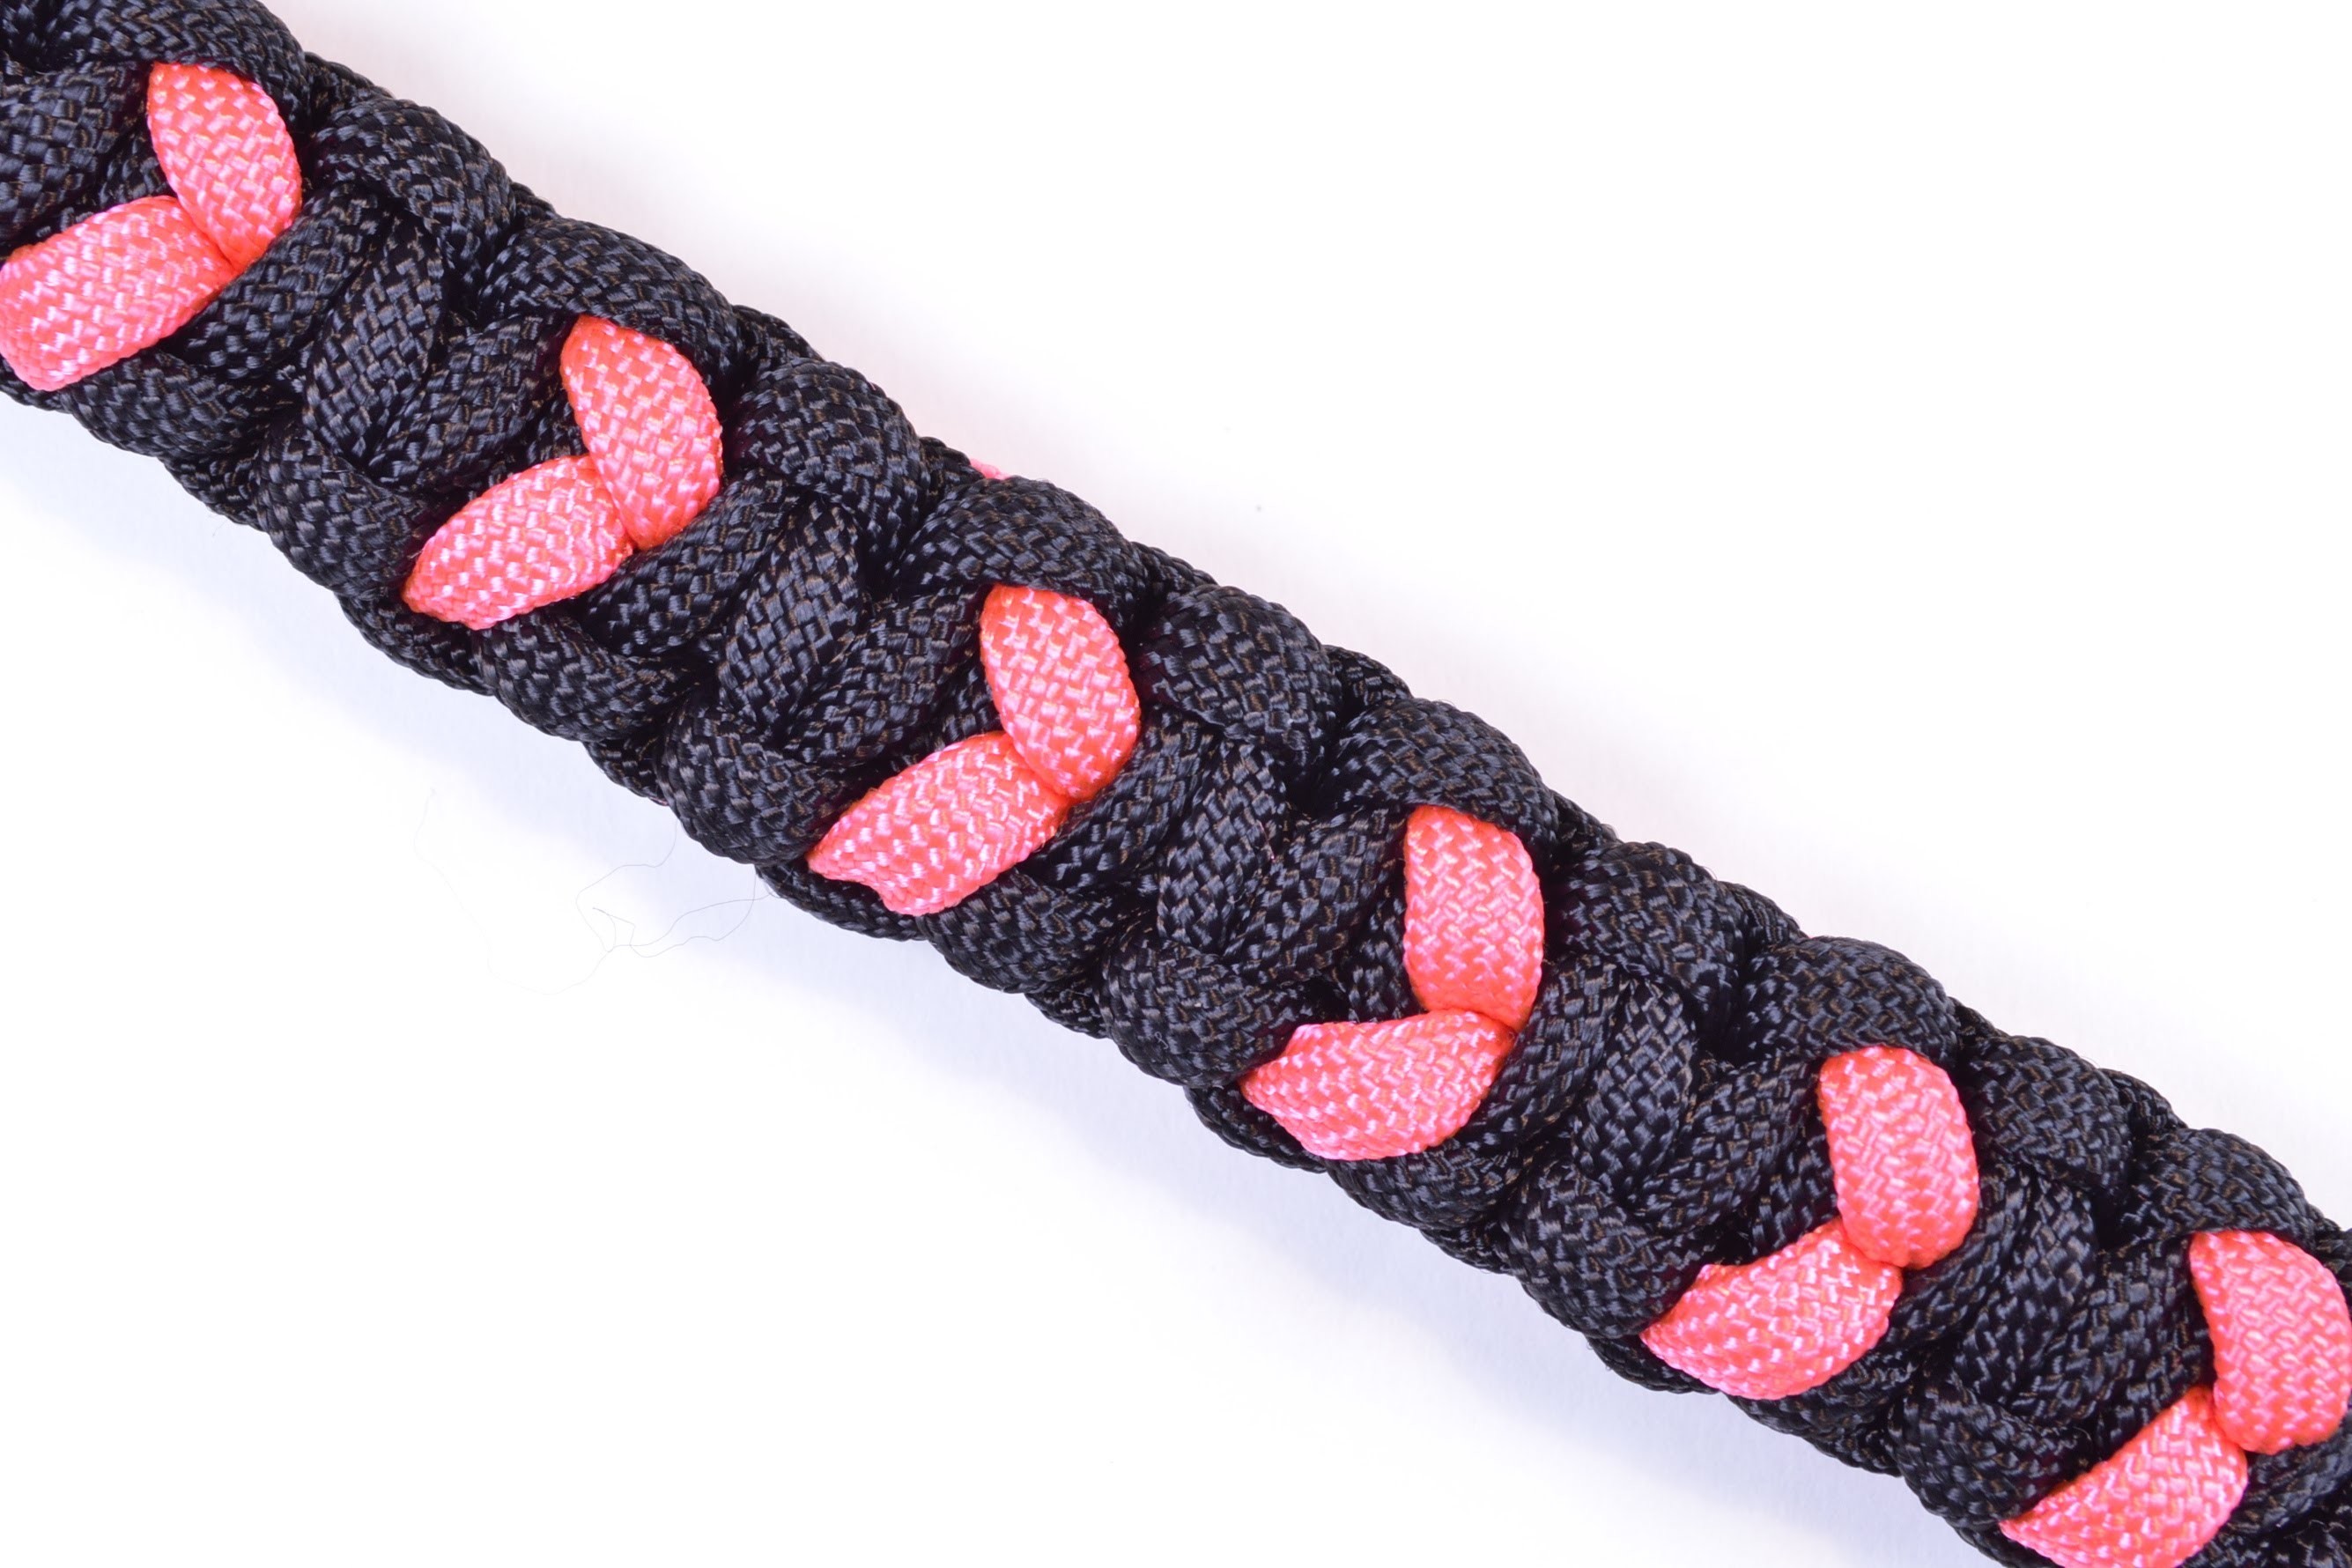 How to Make a Valentines Heart Bracelet - BoredParacord